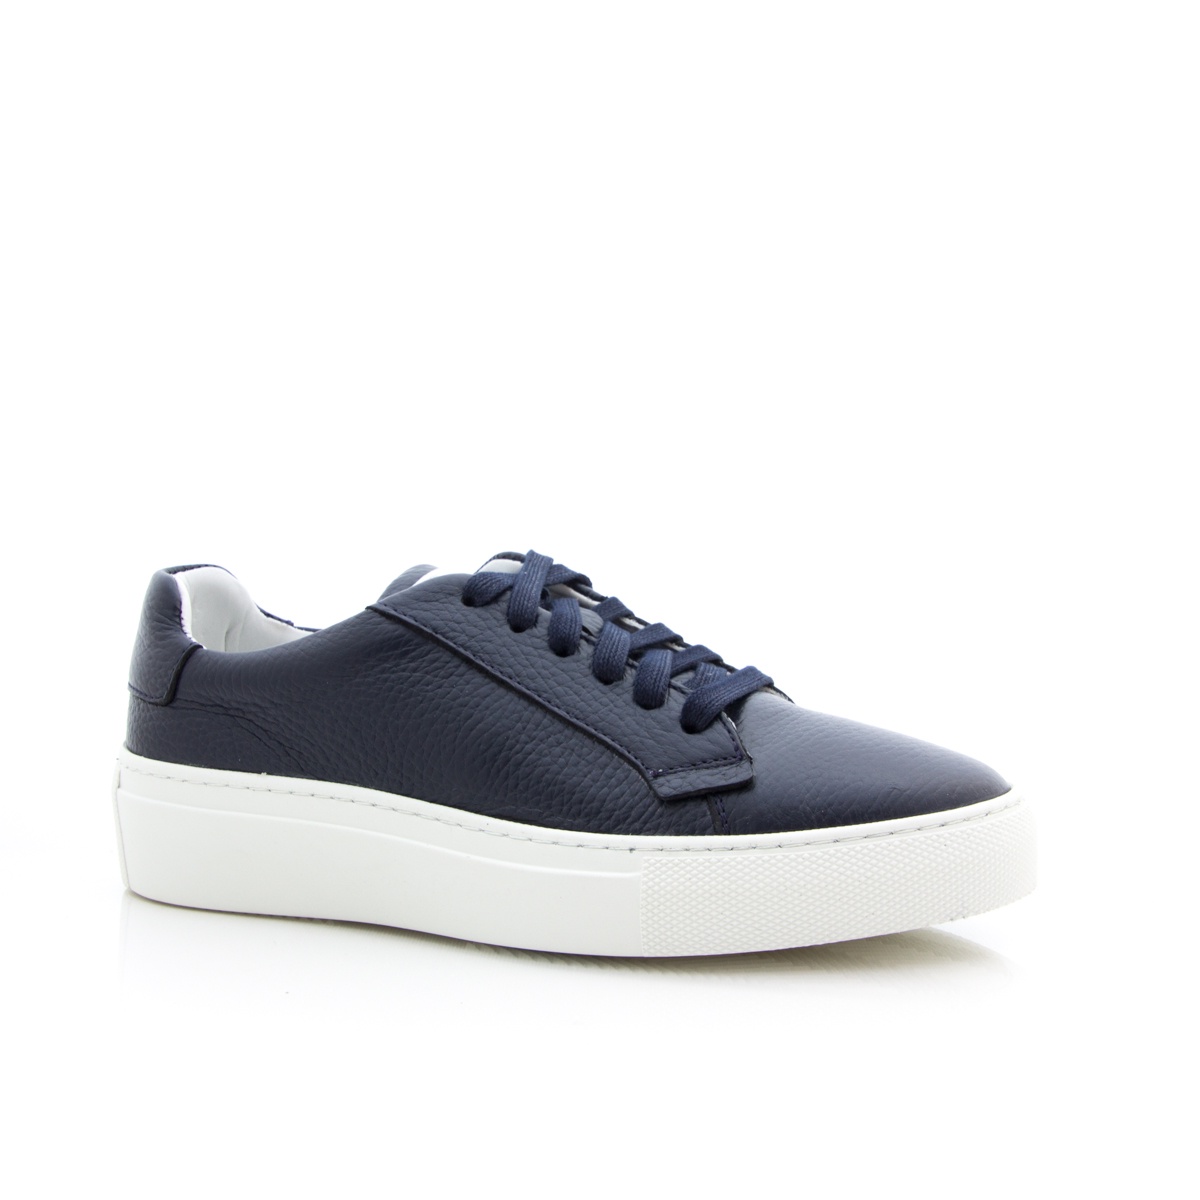 Sempre Di Sneakers Navy - Issimo Shoes